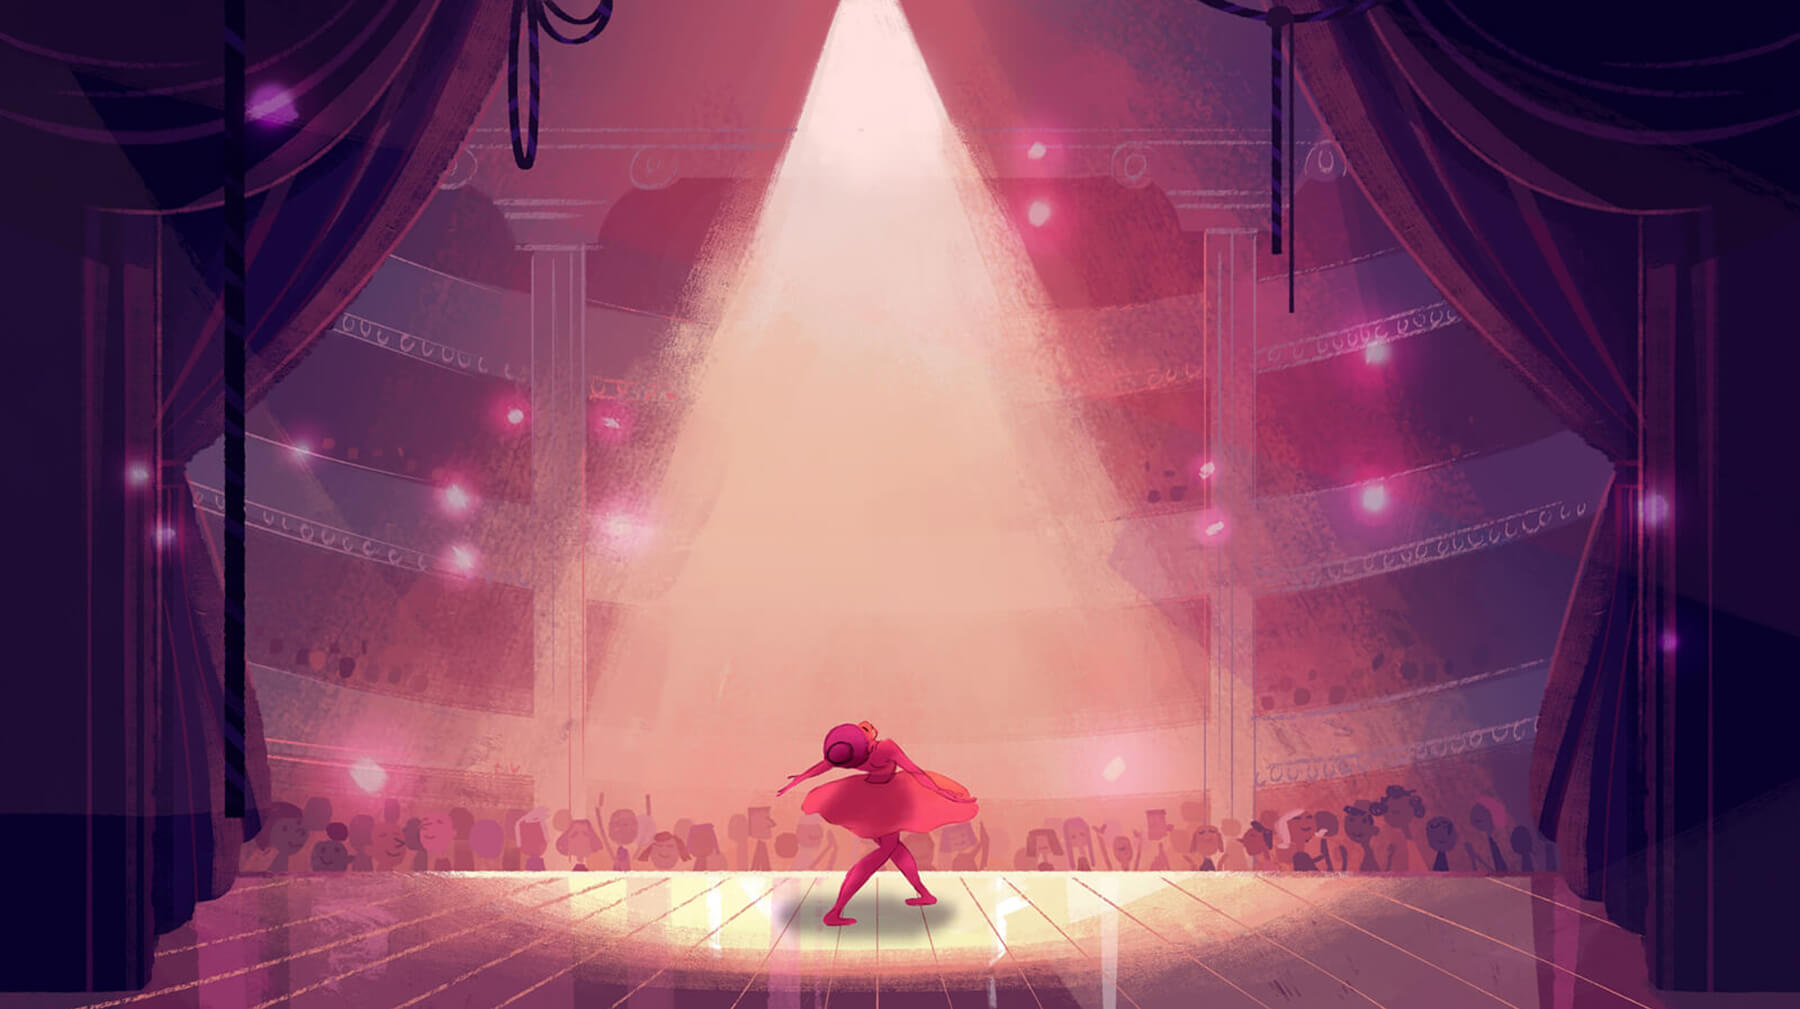 Screen capture from the DigiPen student film Etude. A ballerina, bathed in pink stage light, dances in front of a packed audience in a large, ornate theater.